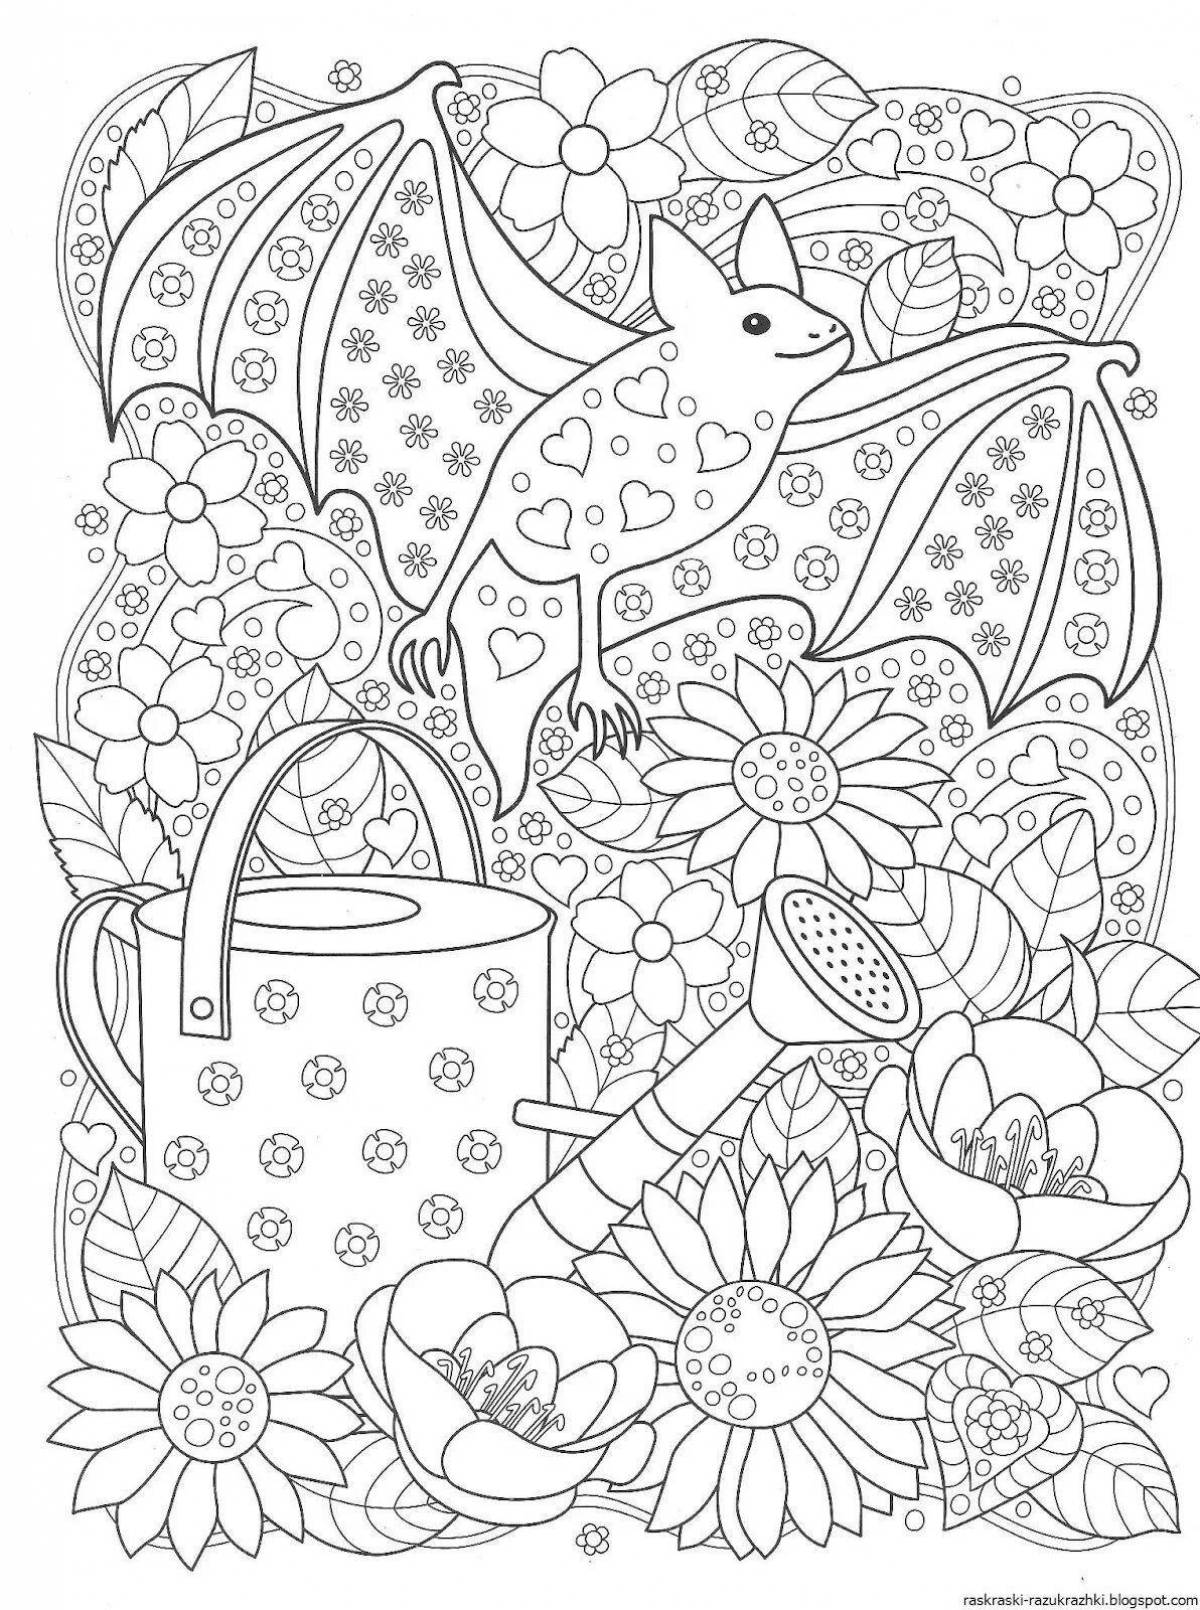 Bright anti-stress coloring book for children 5-6 years old